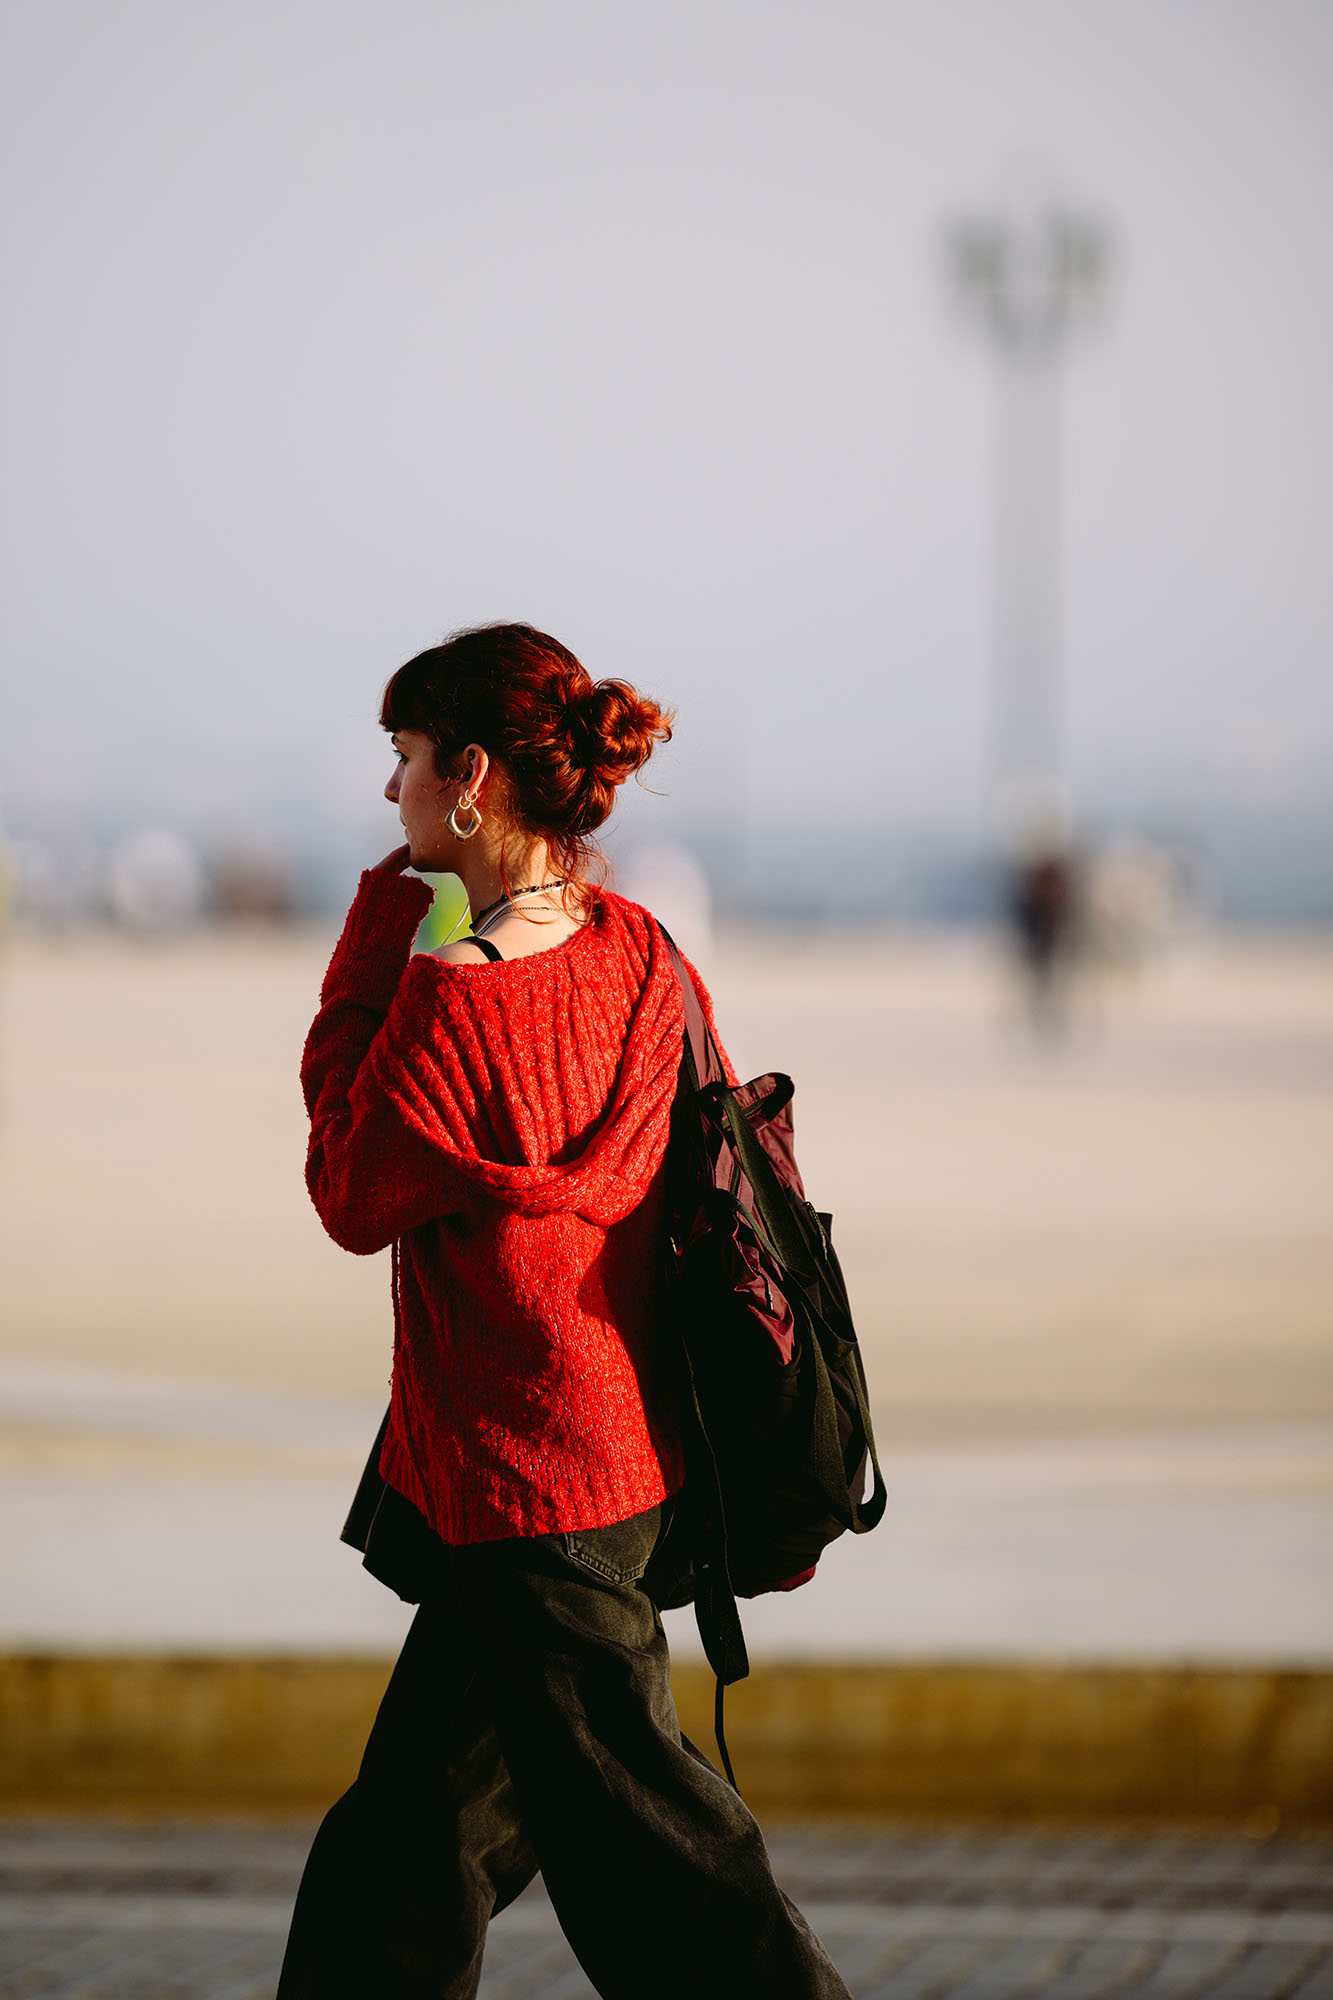 Woman with red hair and in a red sweater in the evening sun at the Praca do Comercio in central Lisbon, Portugal